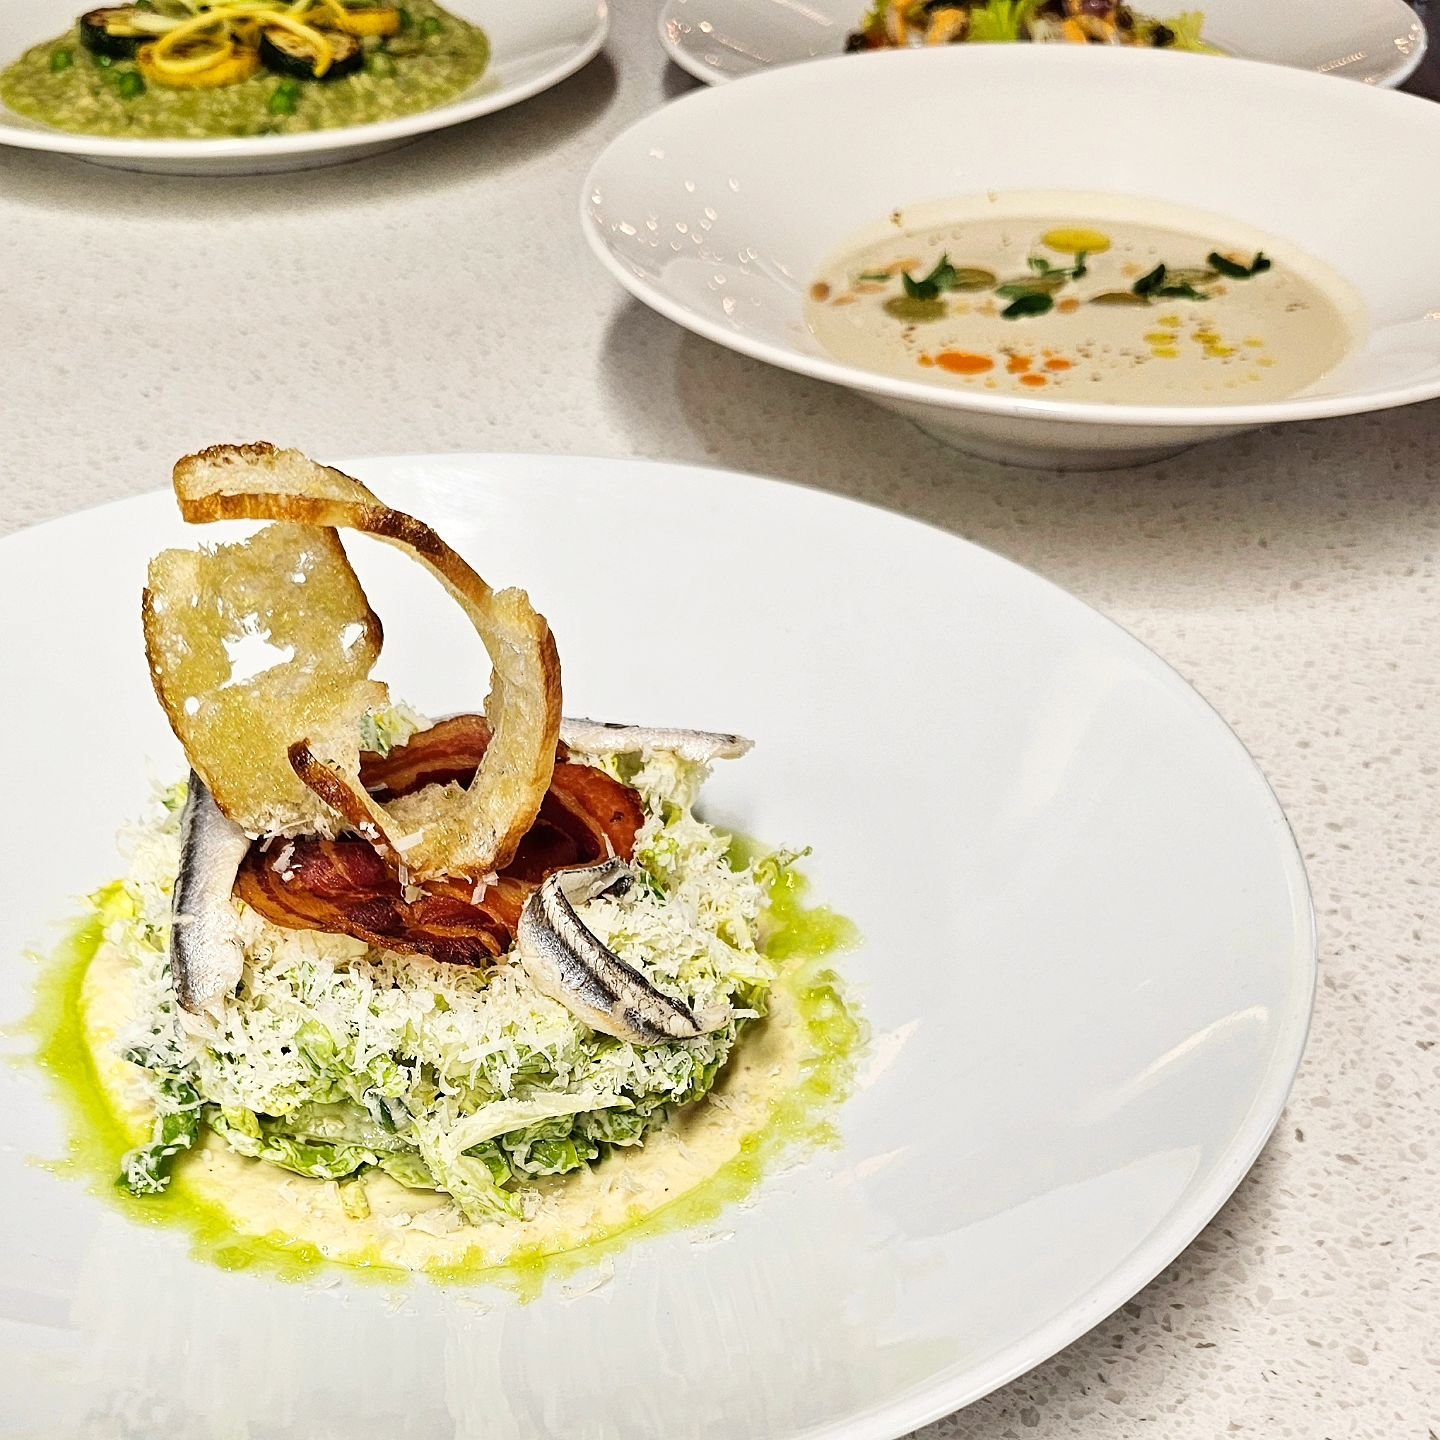 Caesar Salad
~Romaine, White Anchovies, Pancetta Crisp, Focaccia

Since 2008, The Chefs' House has given Hospitality and Culinary Arts students from George Brown College, the opportunity to learn in a live restaurant environment

Book your reservatio